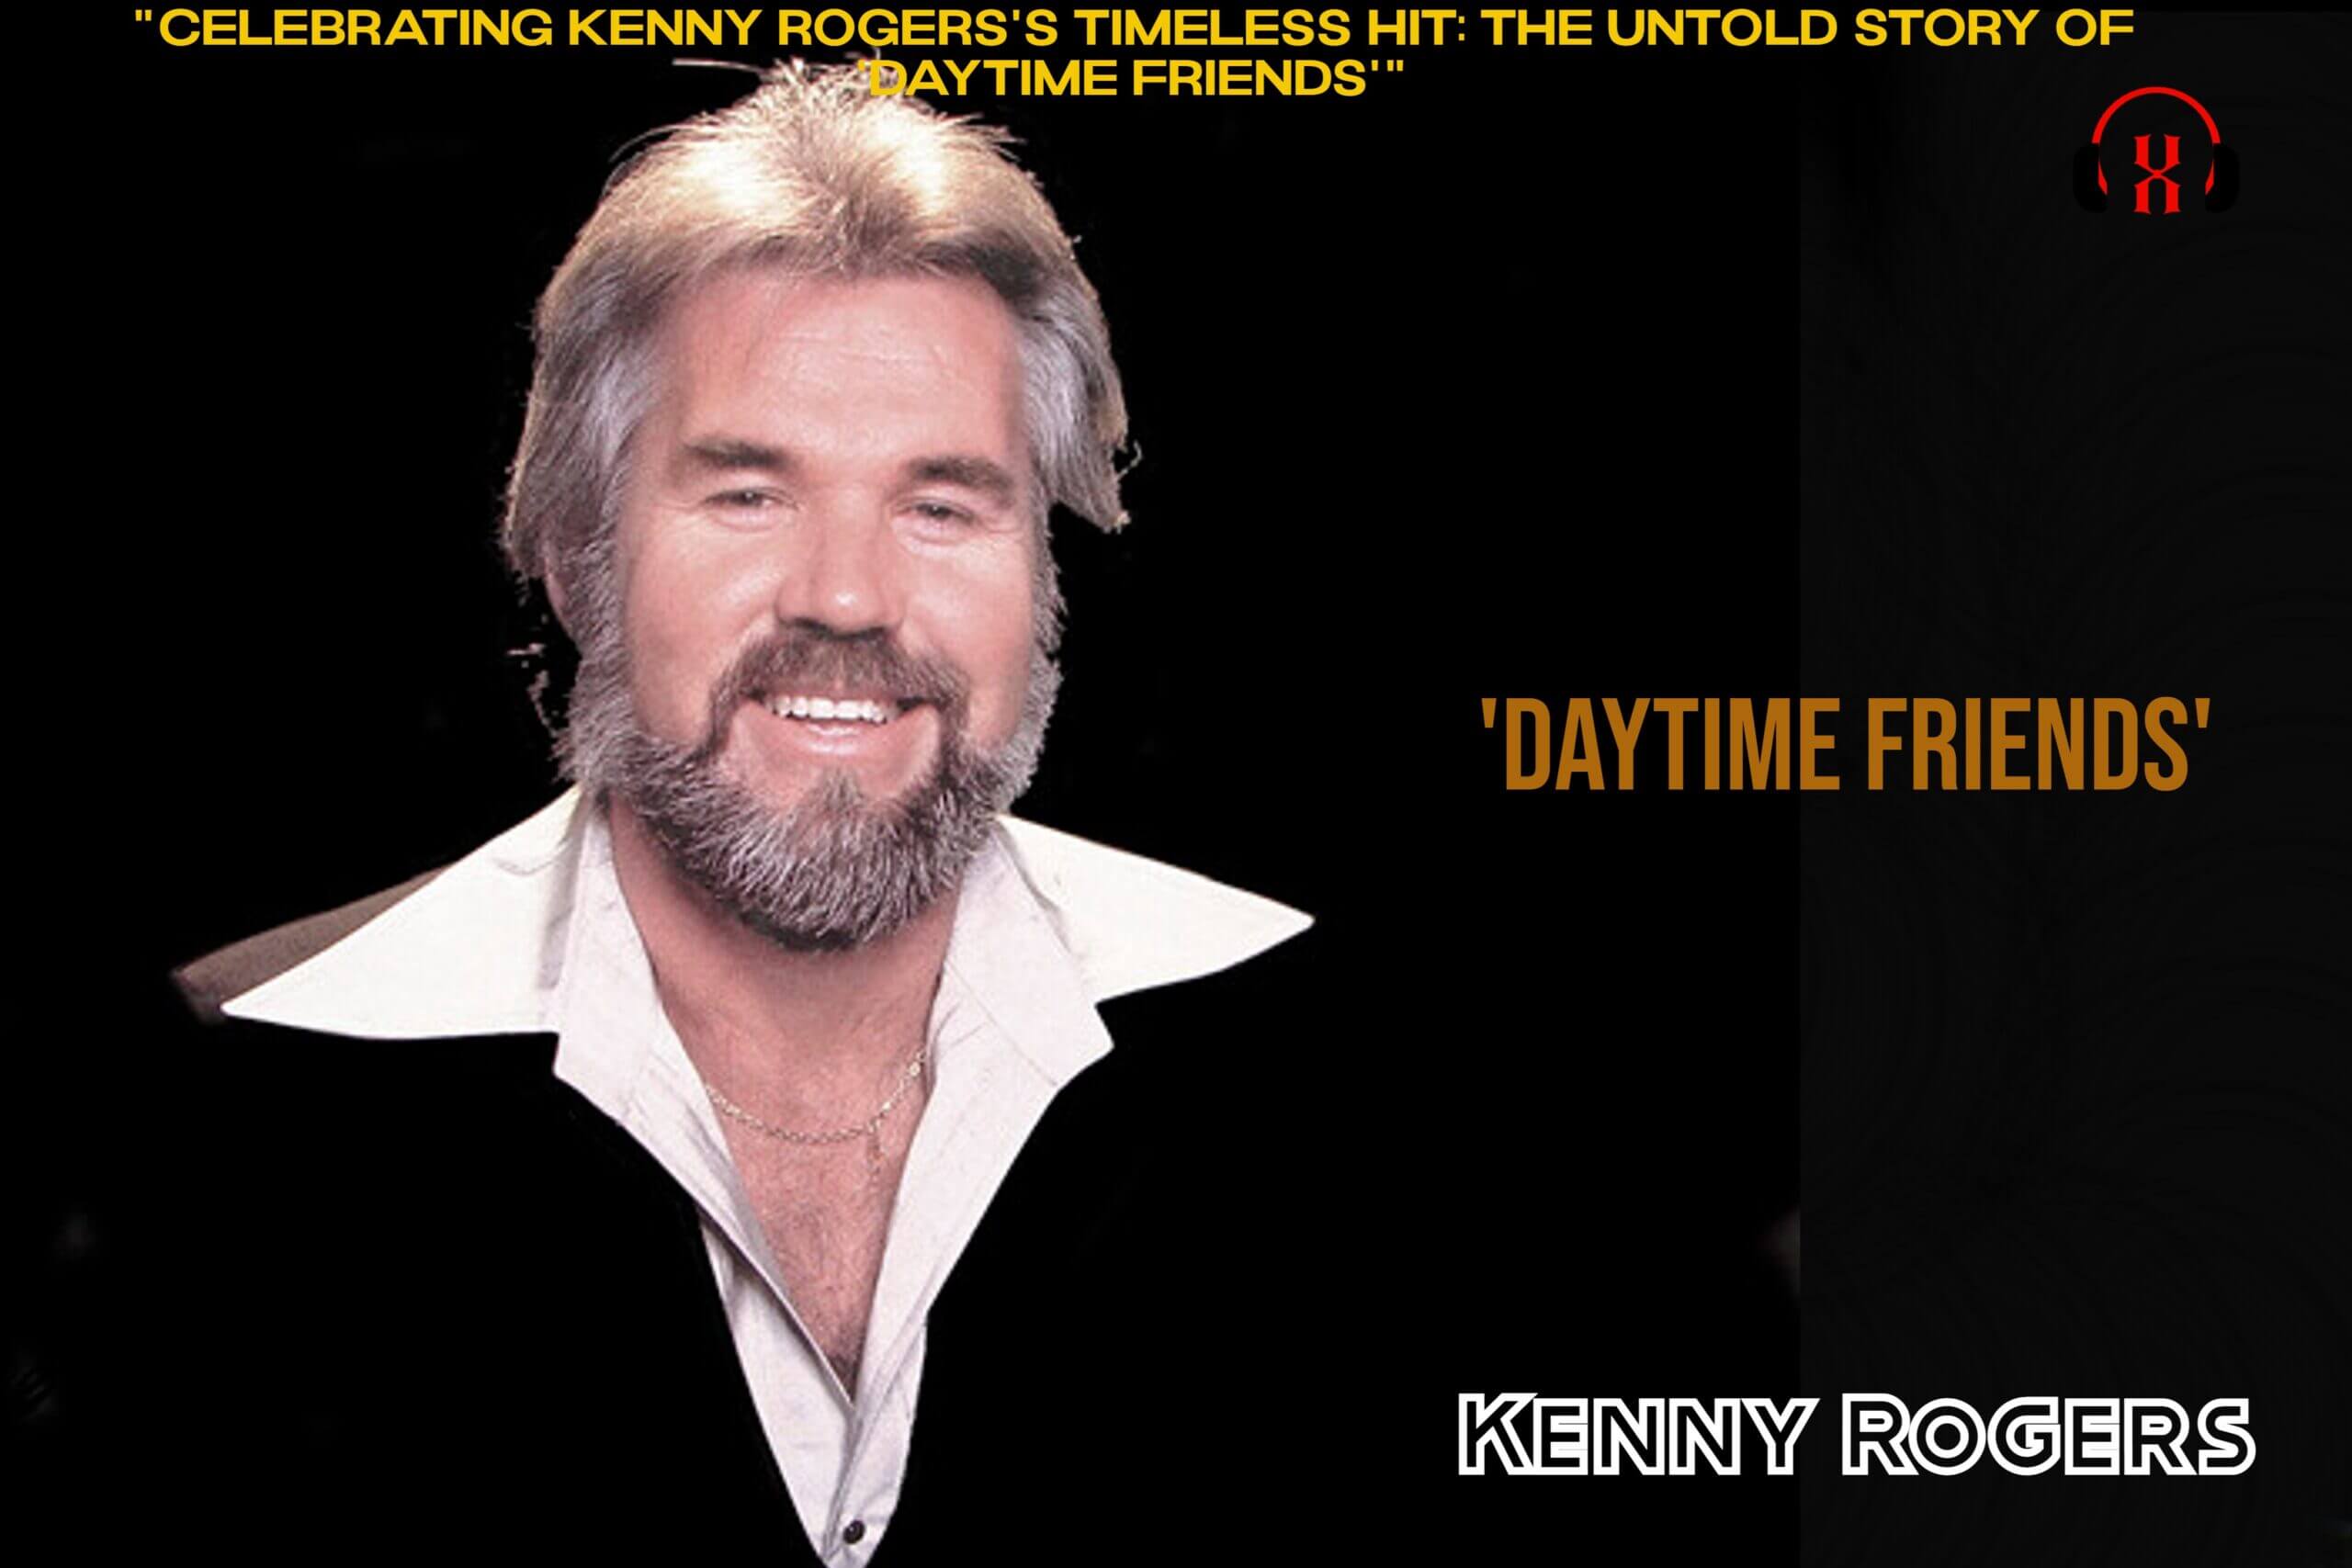 “Celebrating Kenny Rogers’s Timeless Hit: The Untold Story of ‘Daytime Friends'”